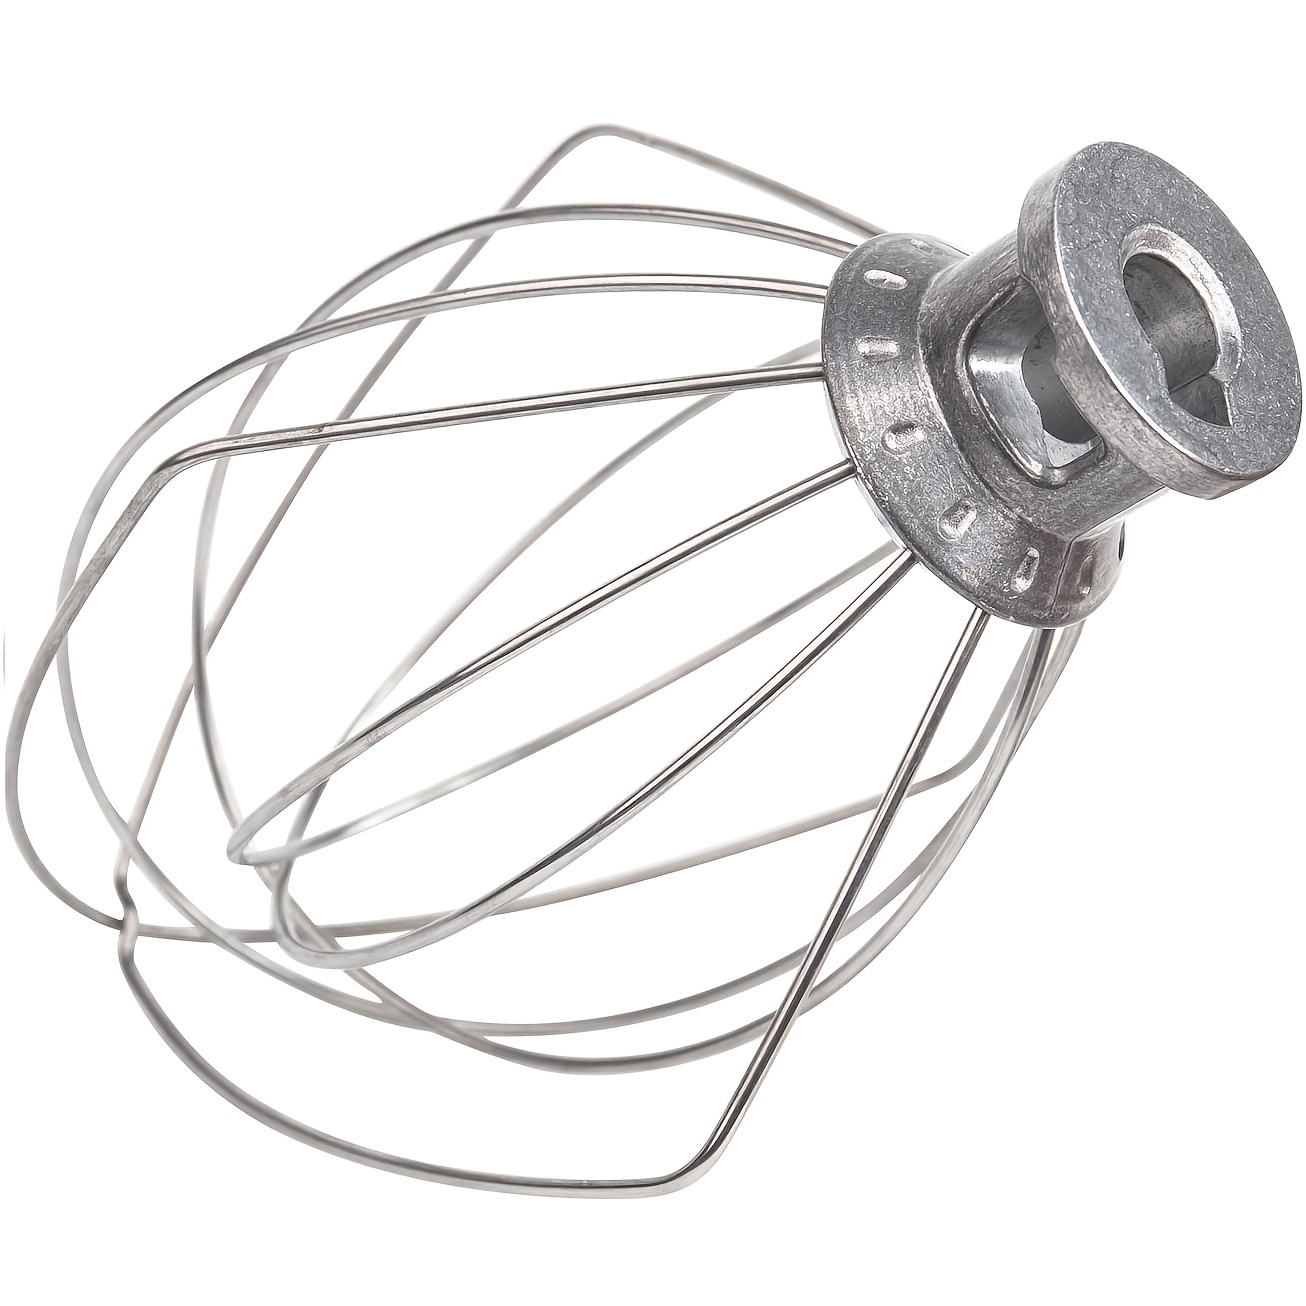 1 pc K45WW Stainless Steel Wire Whip for KitchenAid Wire whisk Fits Artisan  Series Tilt-Head Mixer 4.5 & 5 Quart Bowl